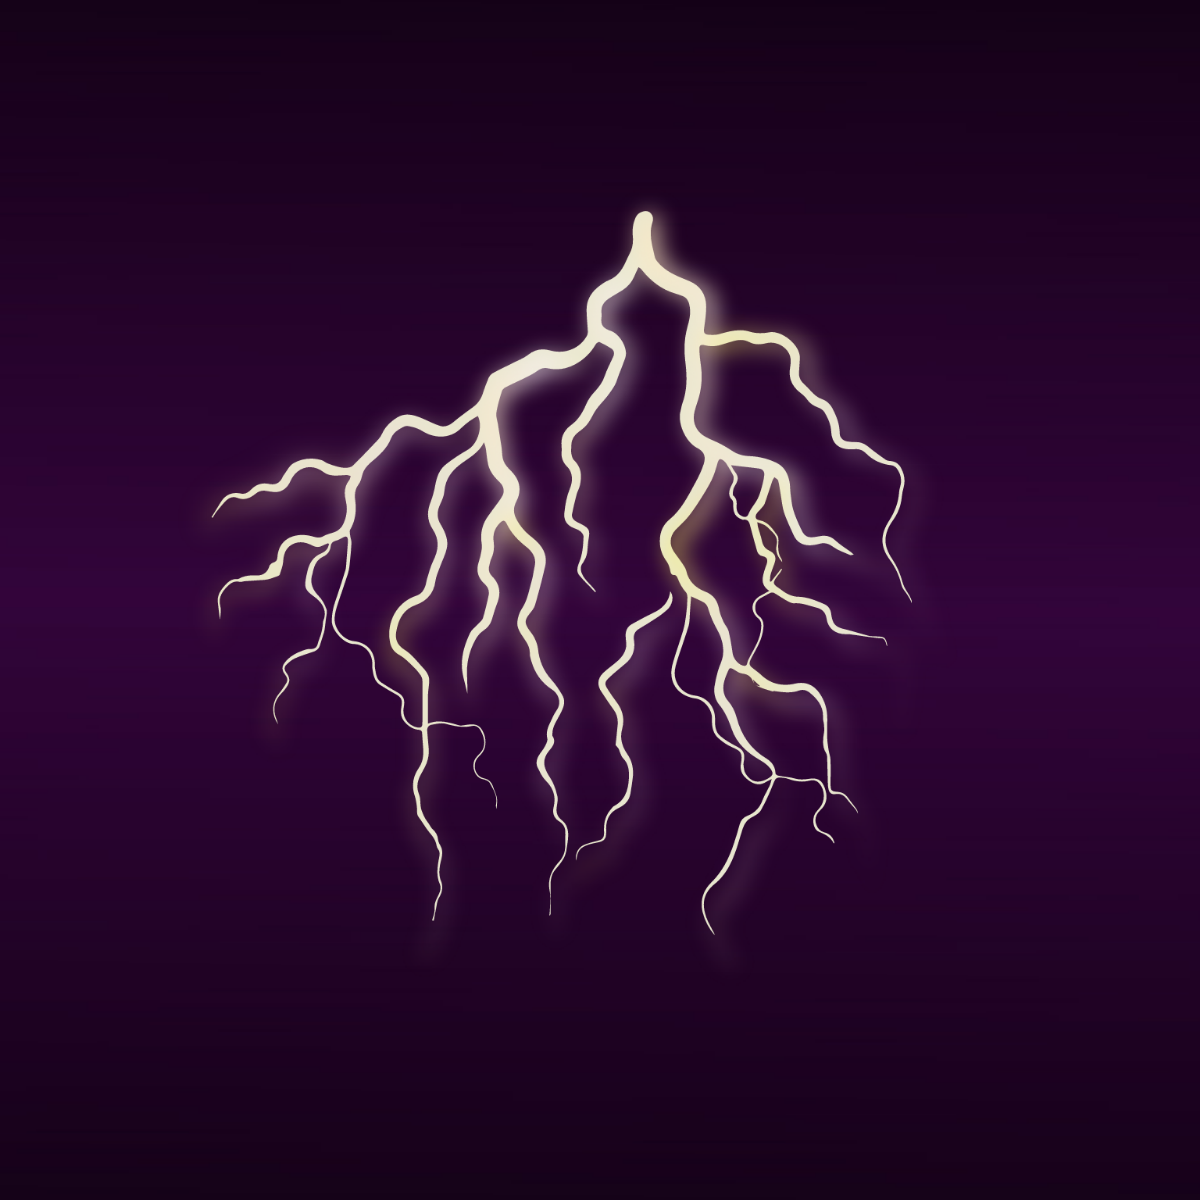 Glowing Lightning Vector Template